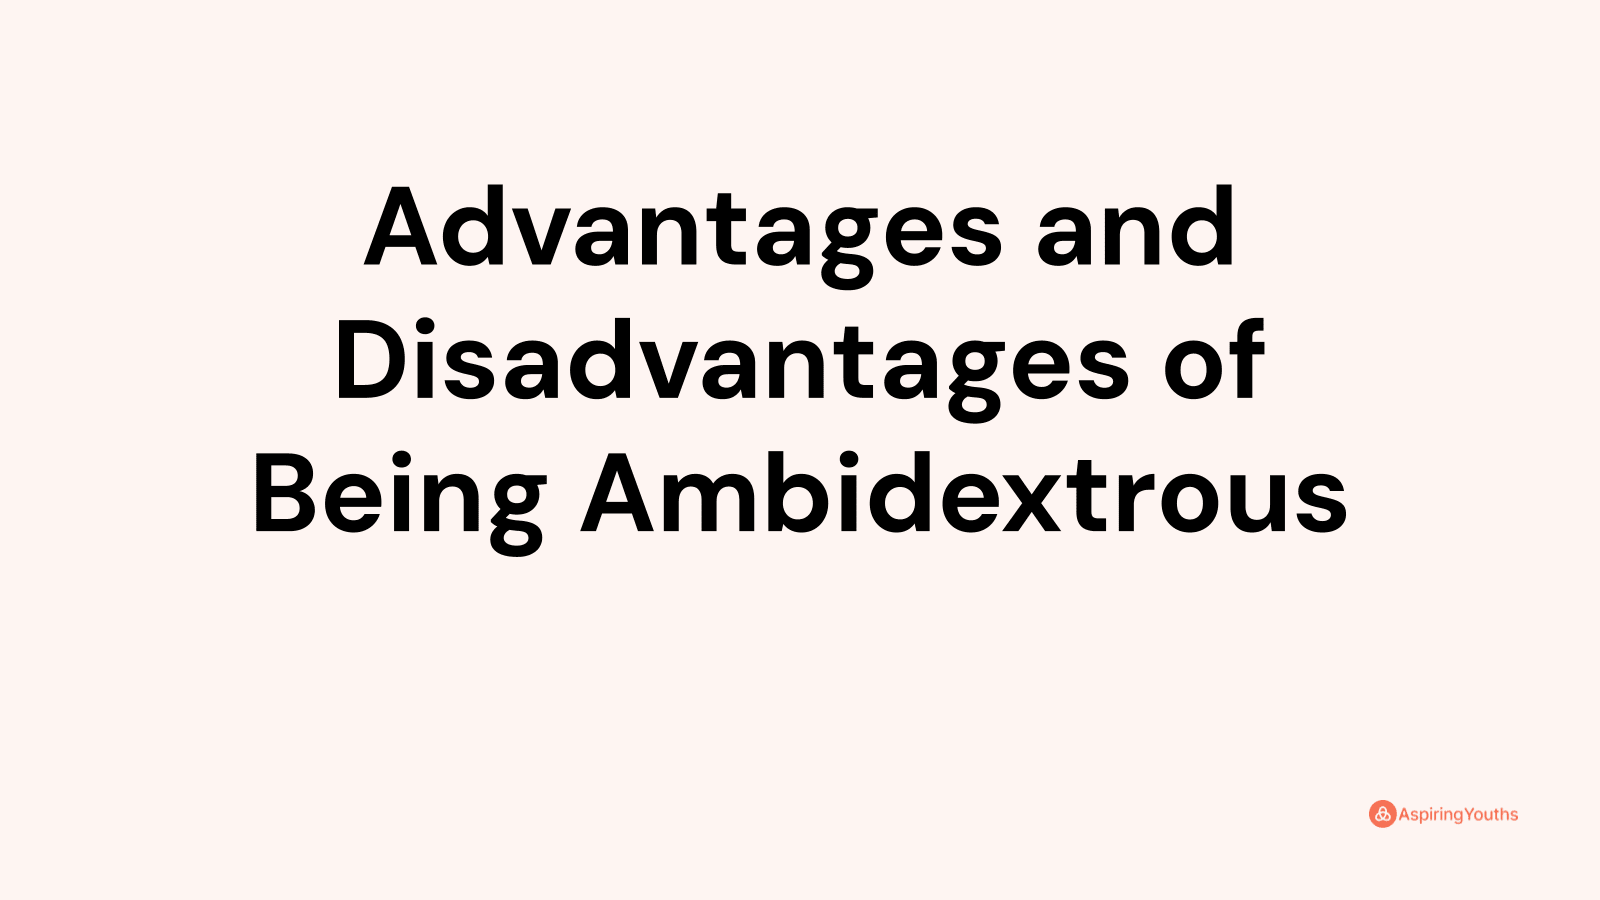 Advantages and disadvantages of Being Ambidextrous